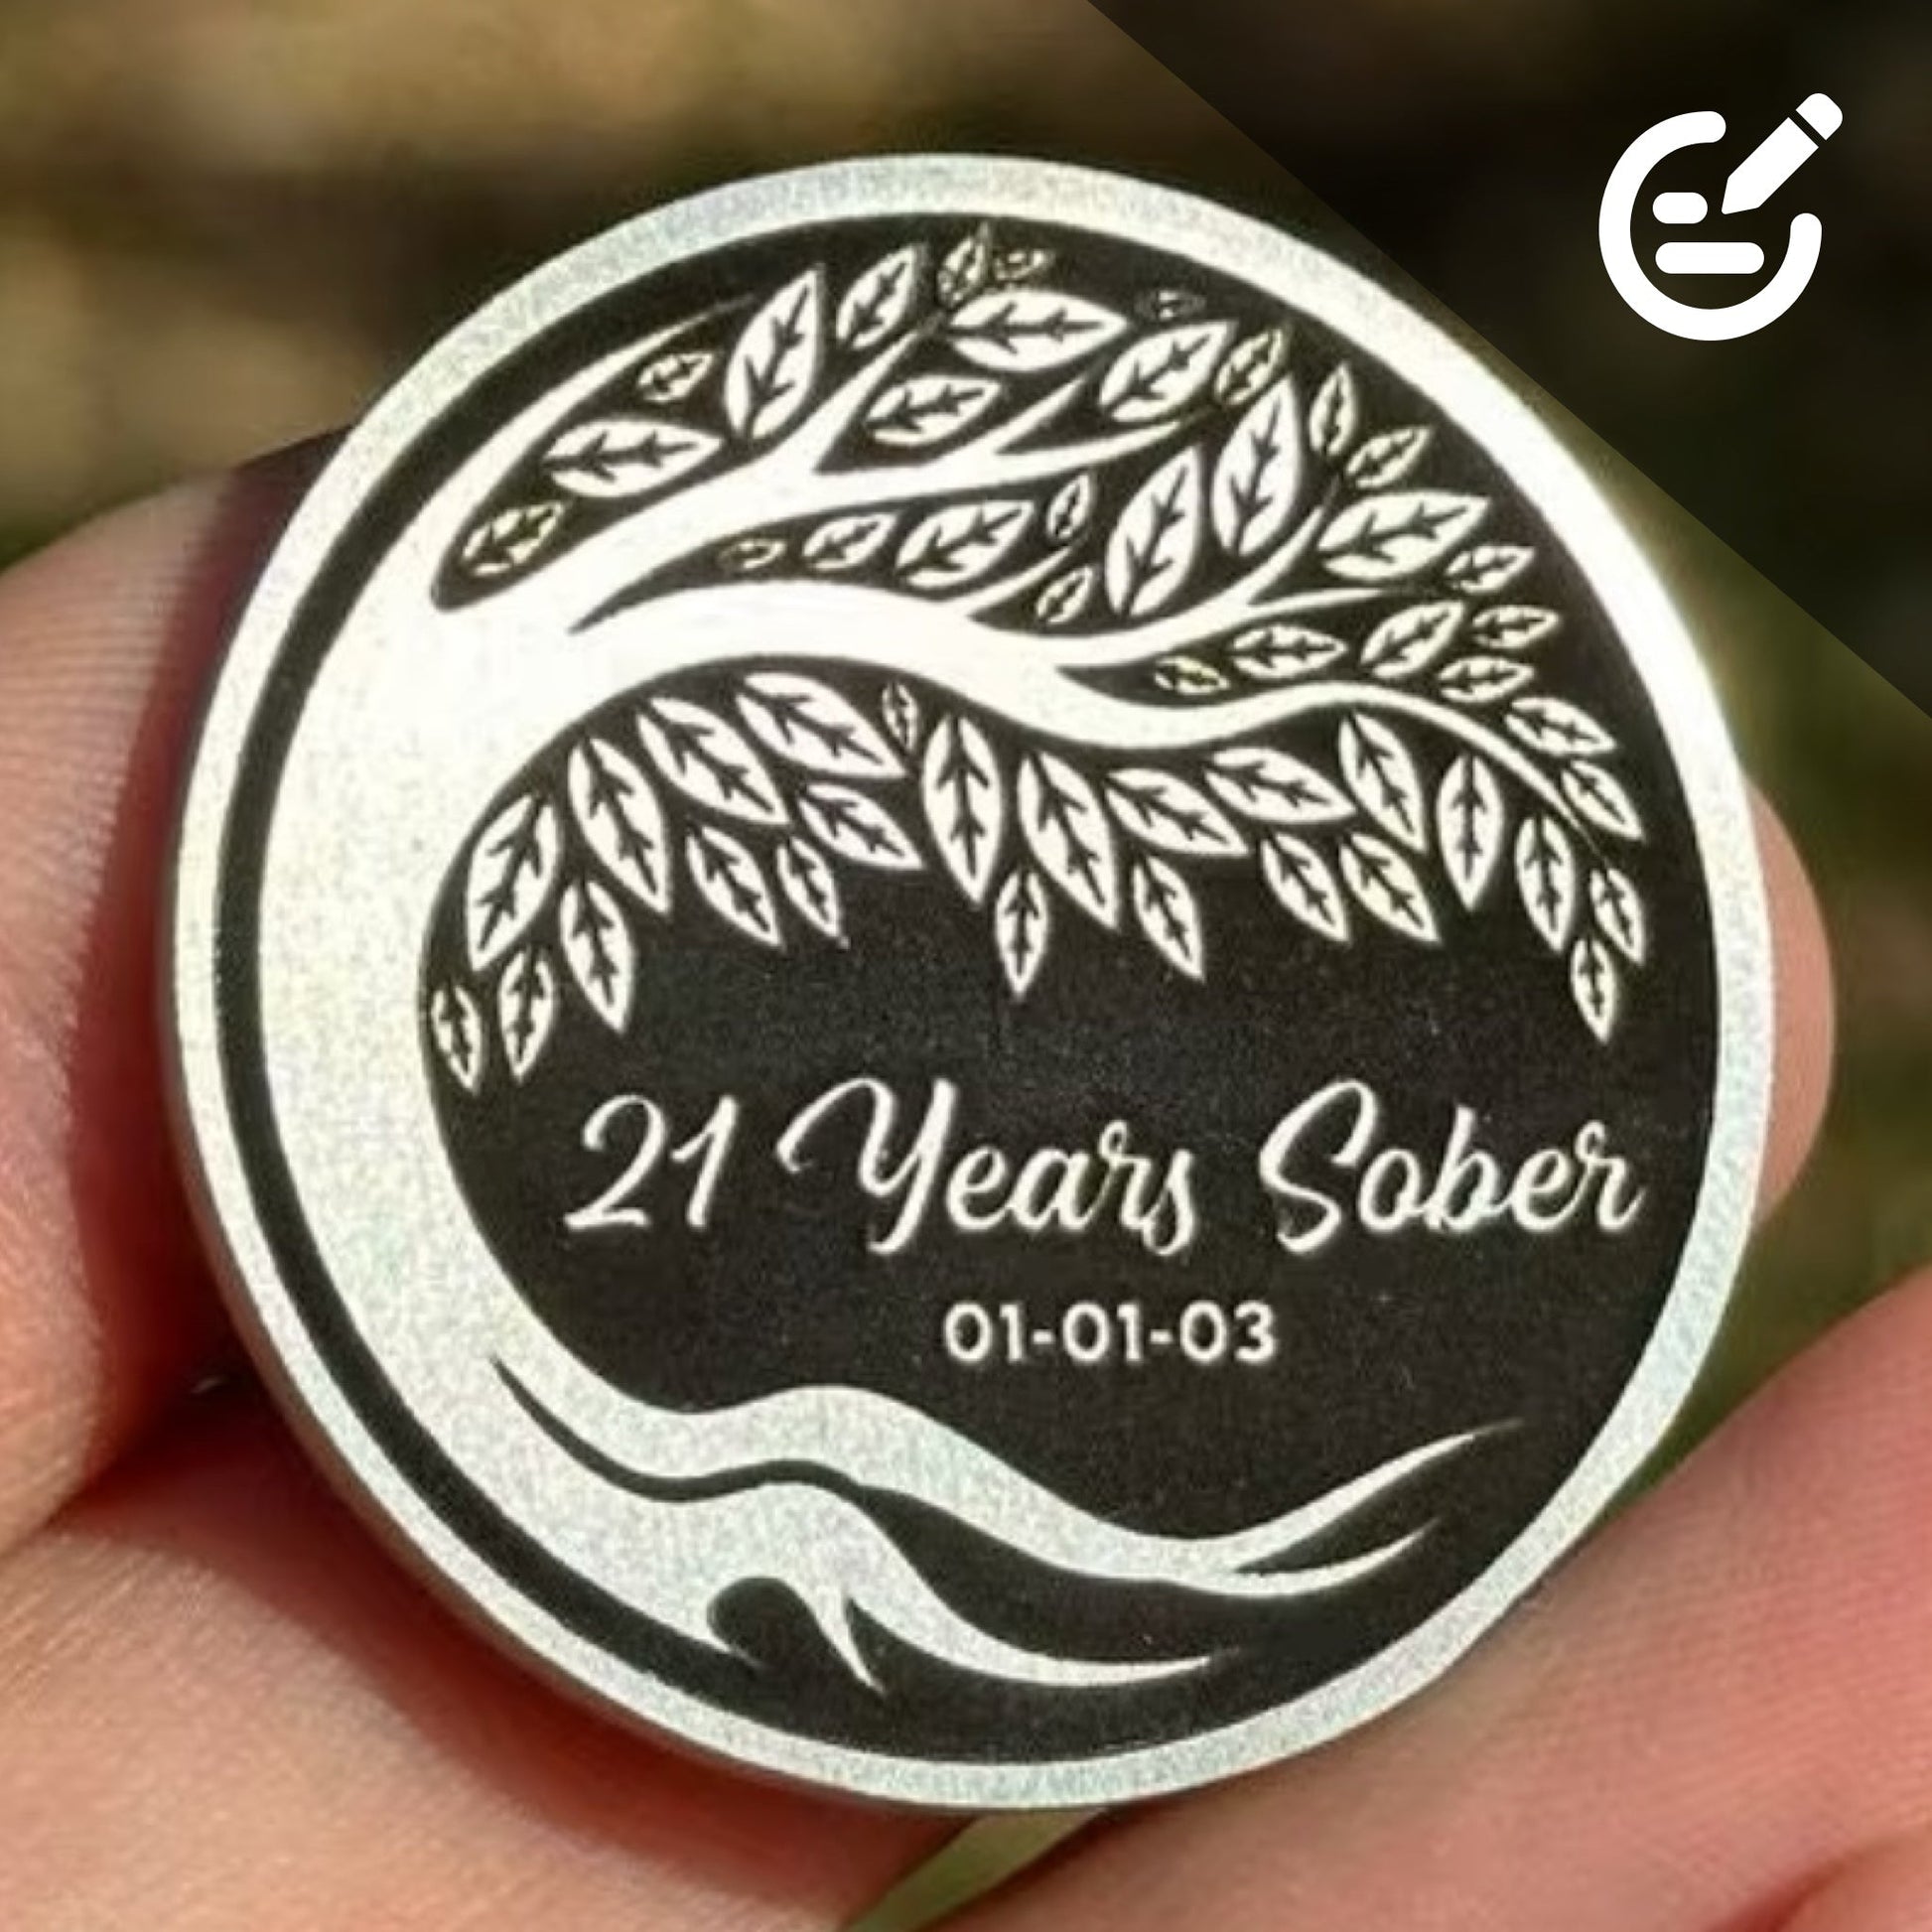 Custom Tree of Life sobriety coin - The Achieve Mint